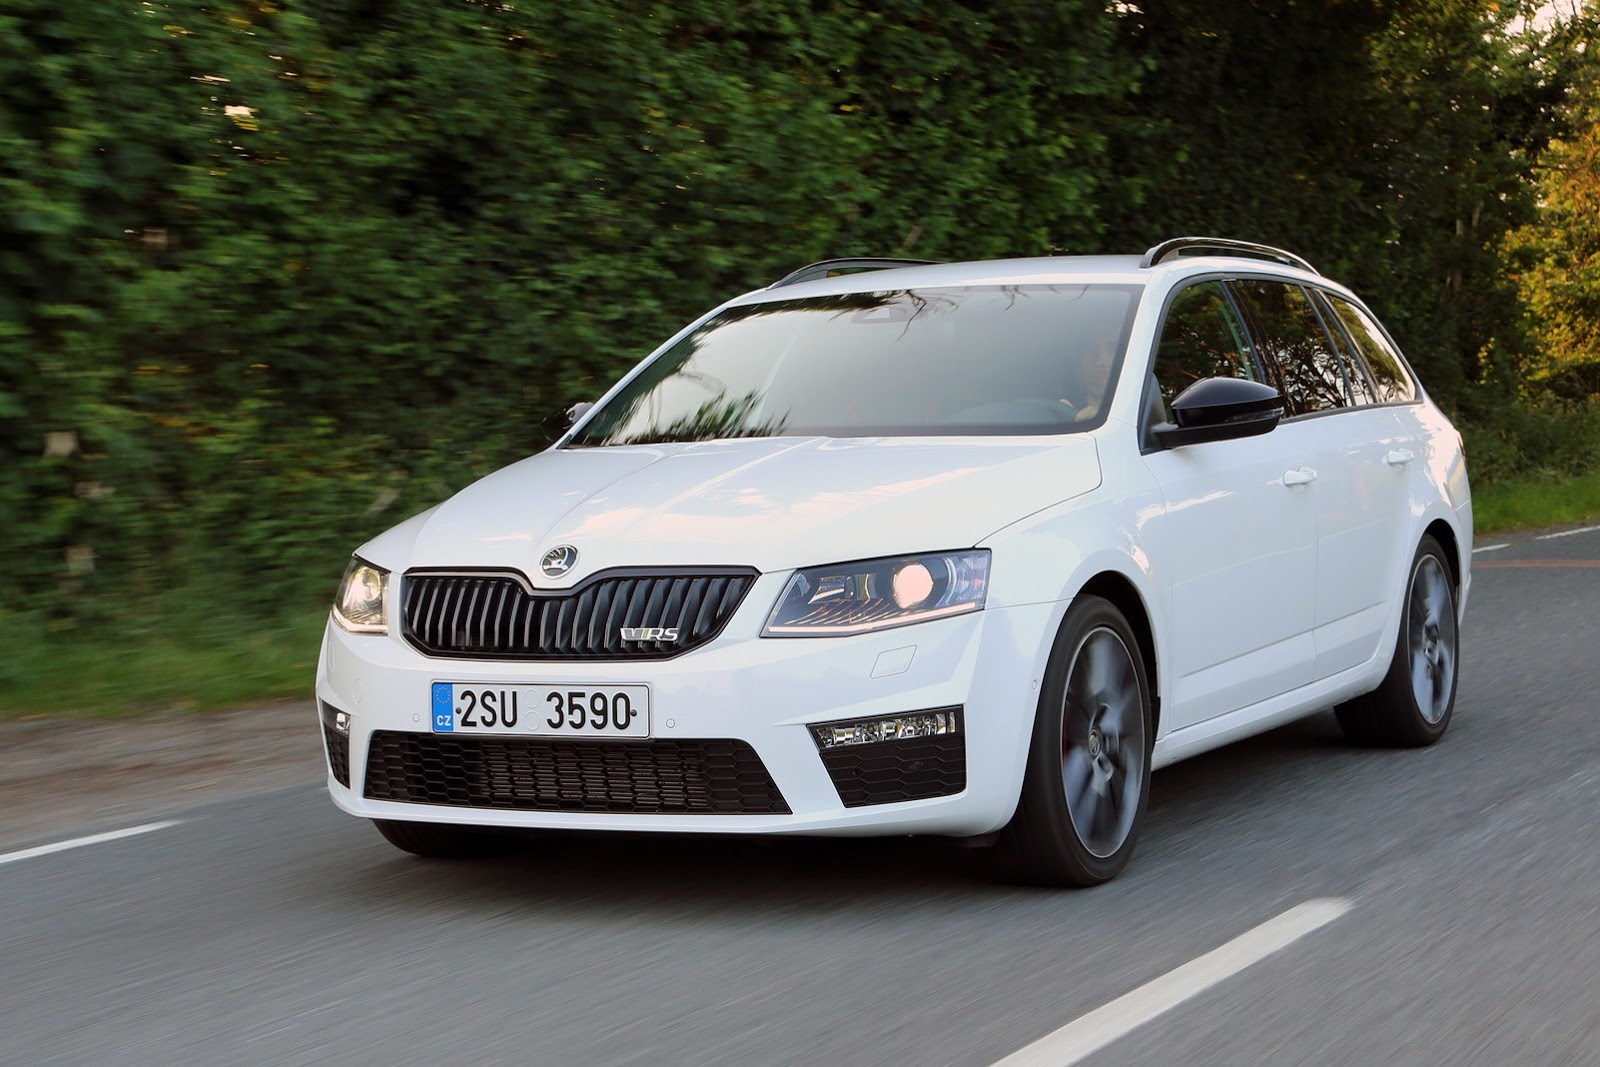 2014 Skoda Octavia RS officially unveiled at Goodwood - Automotorblog